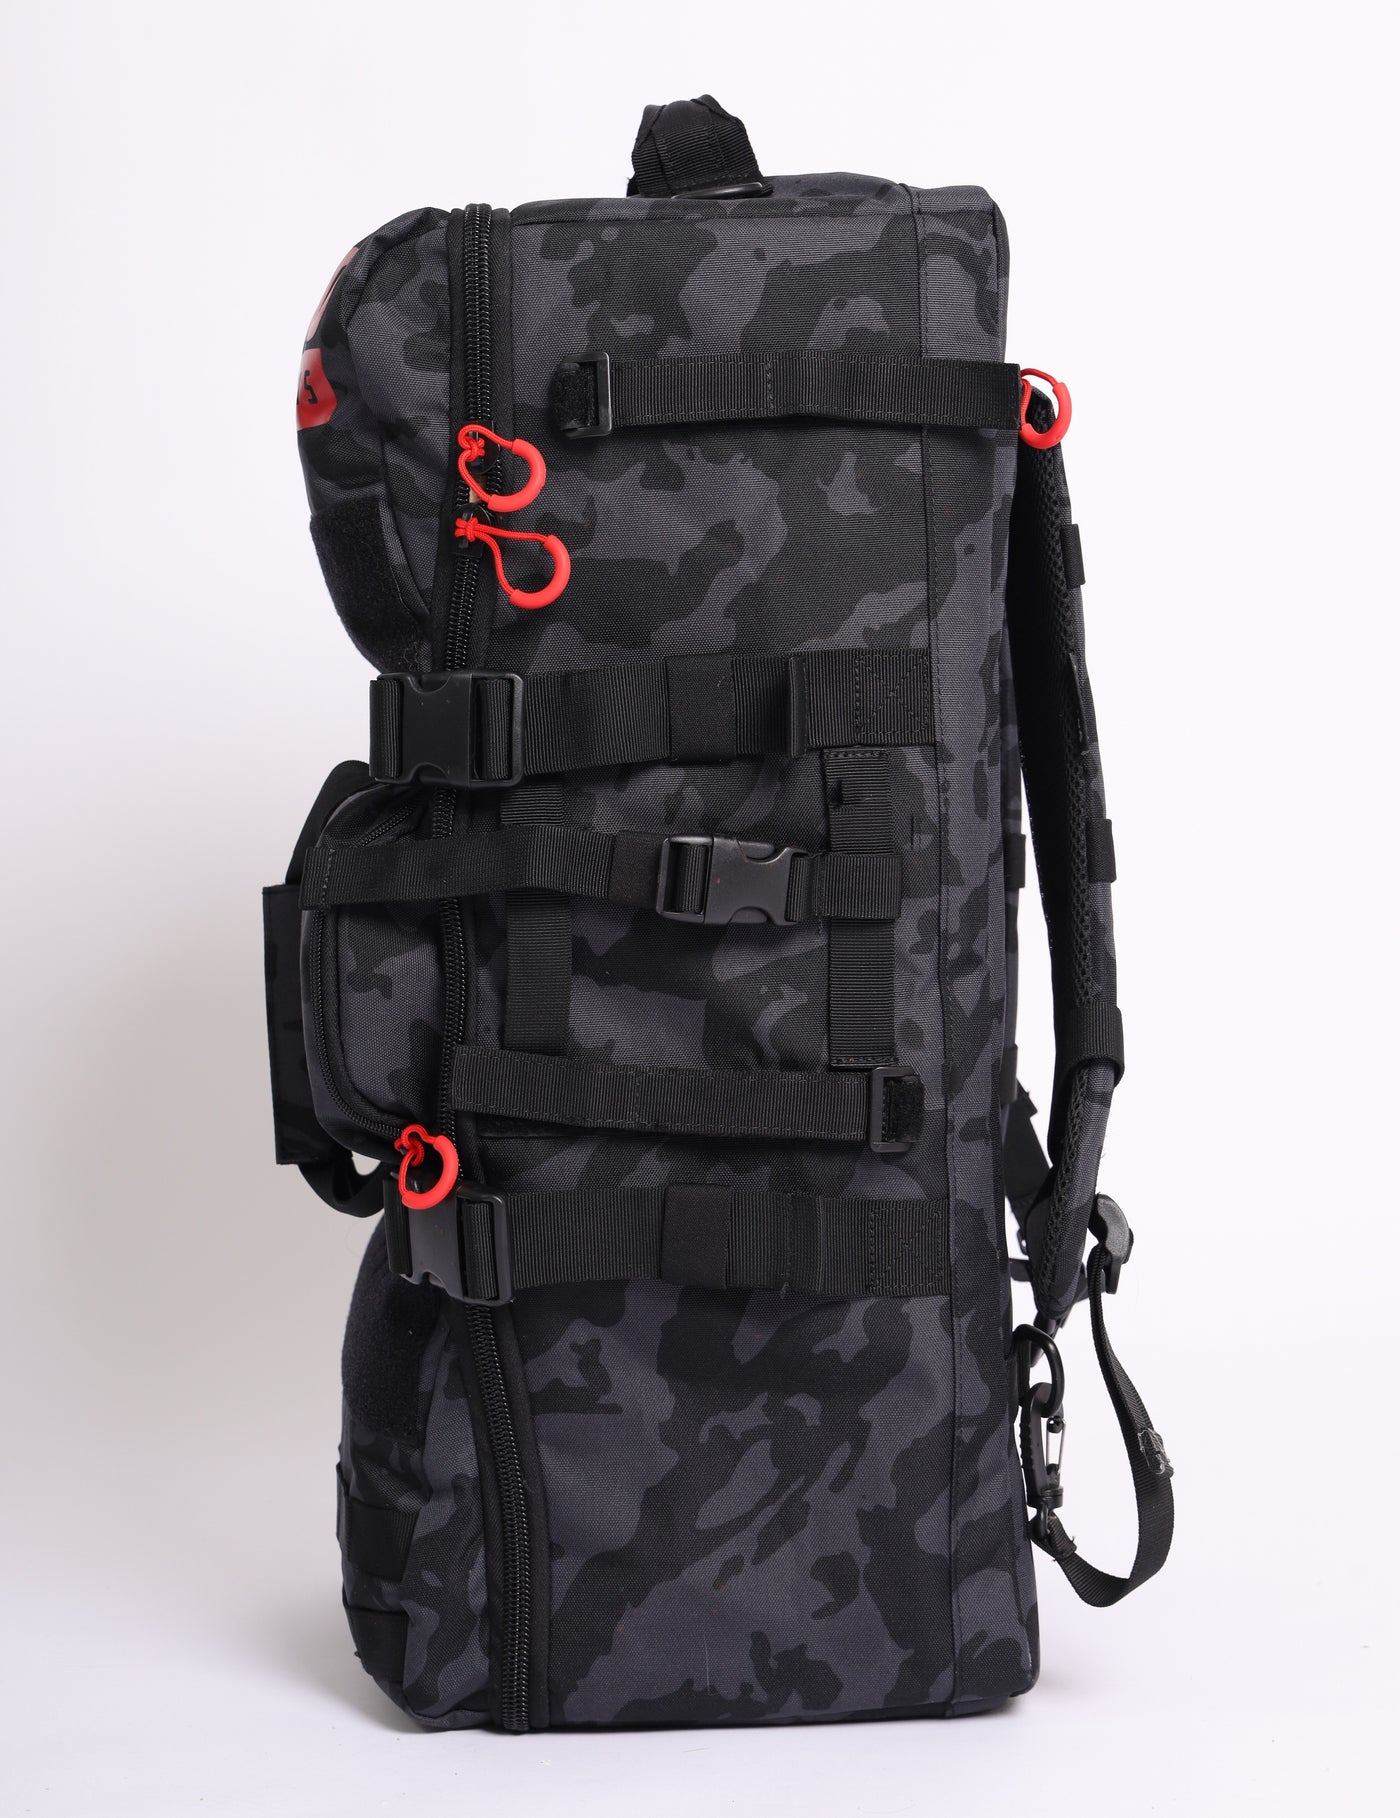 Fire 1.5 Backpack - Black Camo/Red